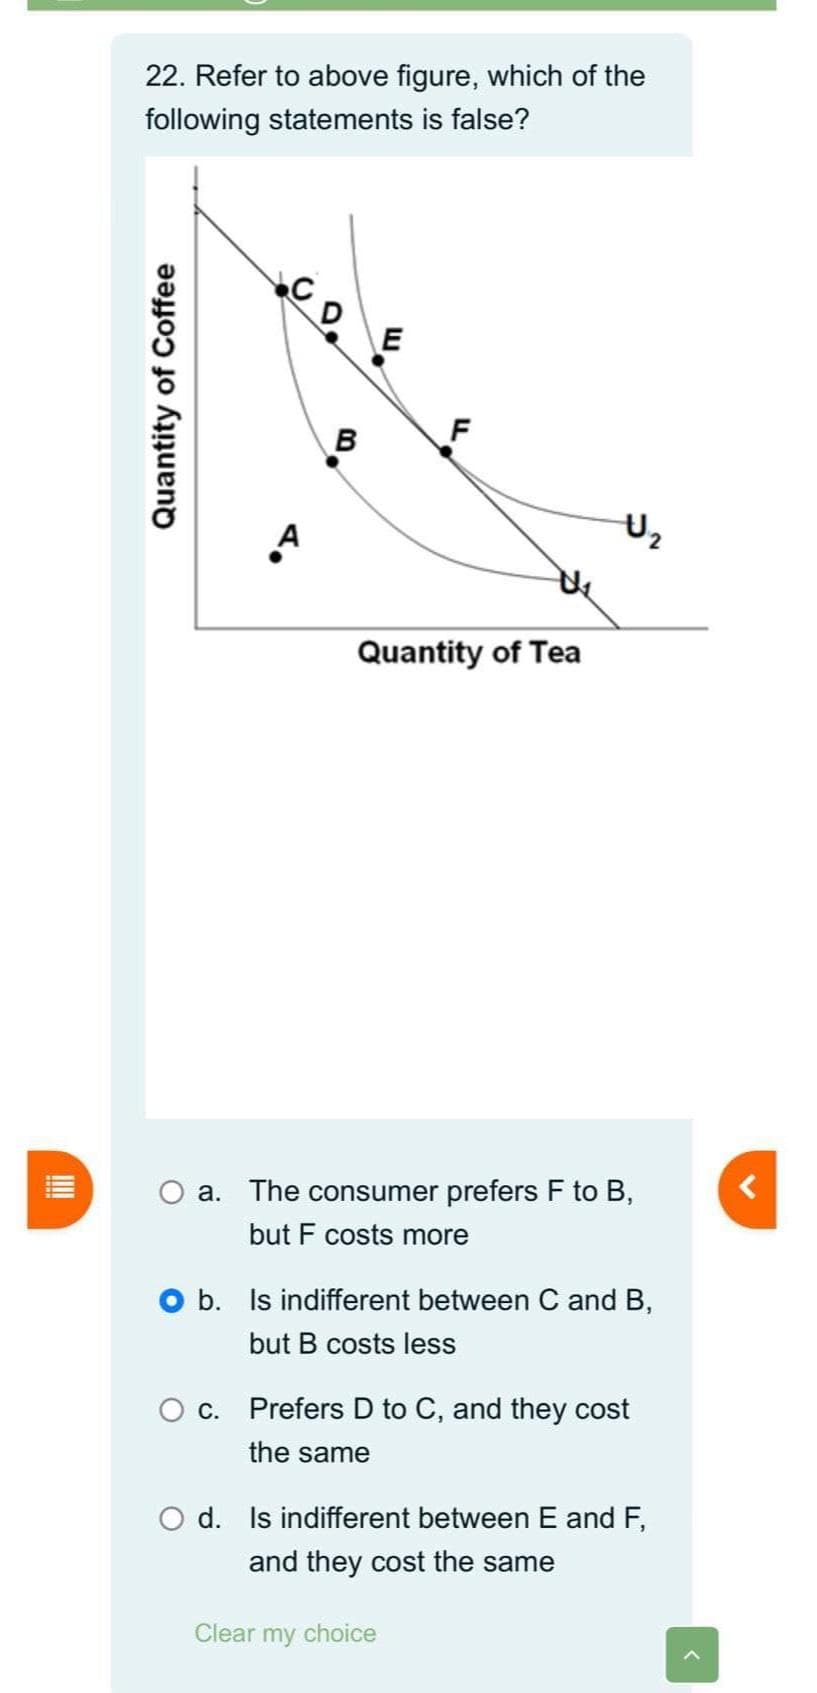 22. Refer to above figure, which of the
following statements is false?
Quantity of Coffee
CD₂.
B
E
Quantity of Tea
Clear my
a. The consumer prefers F to B,
but F costs more
U₂
b. Is indifferent between C and B,
but B costs less
O c. Prefers D to C, and they cost
the same
O d. Is indifferent between E and F,
and they cost the same
choice